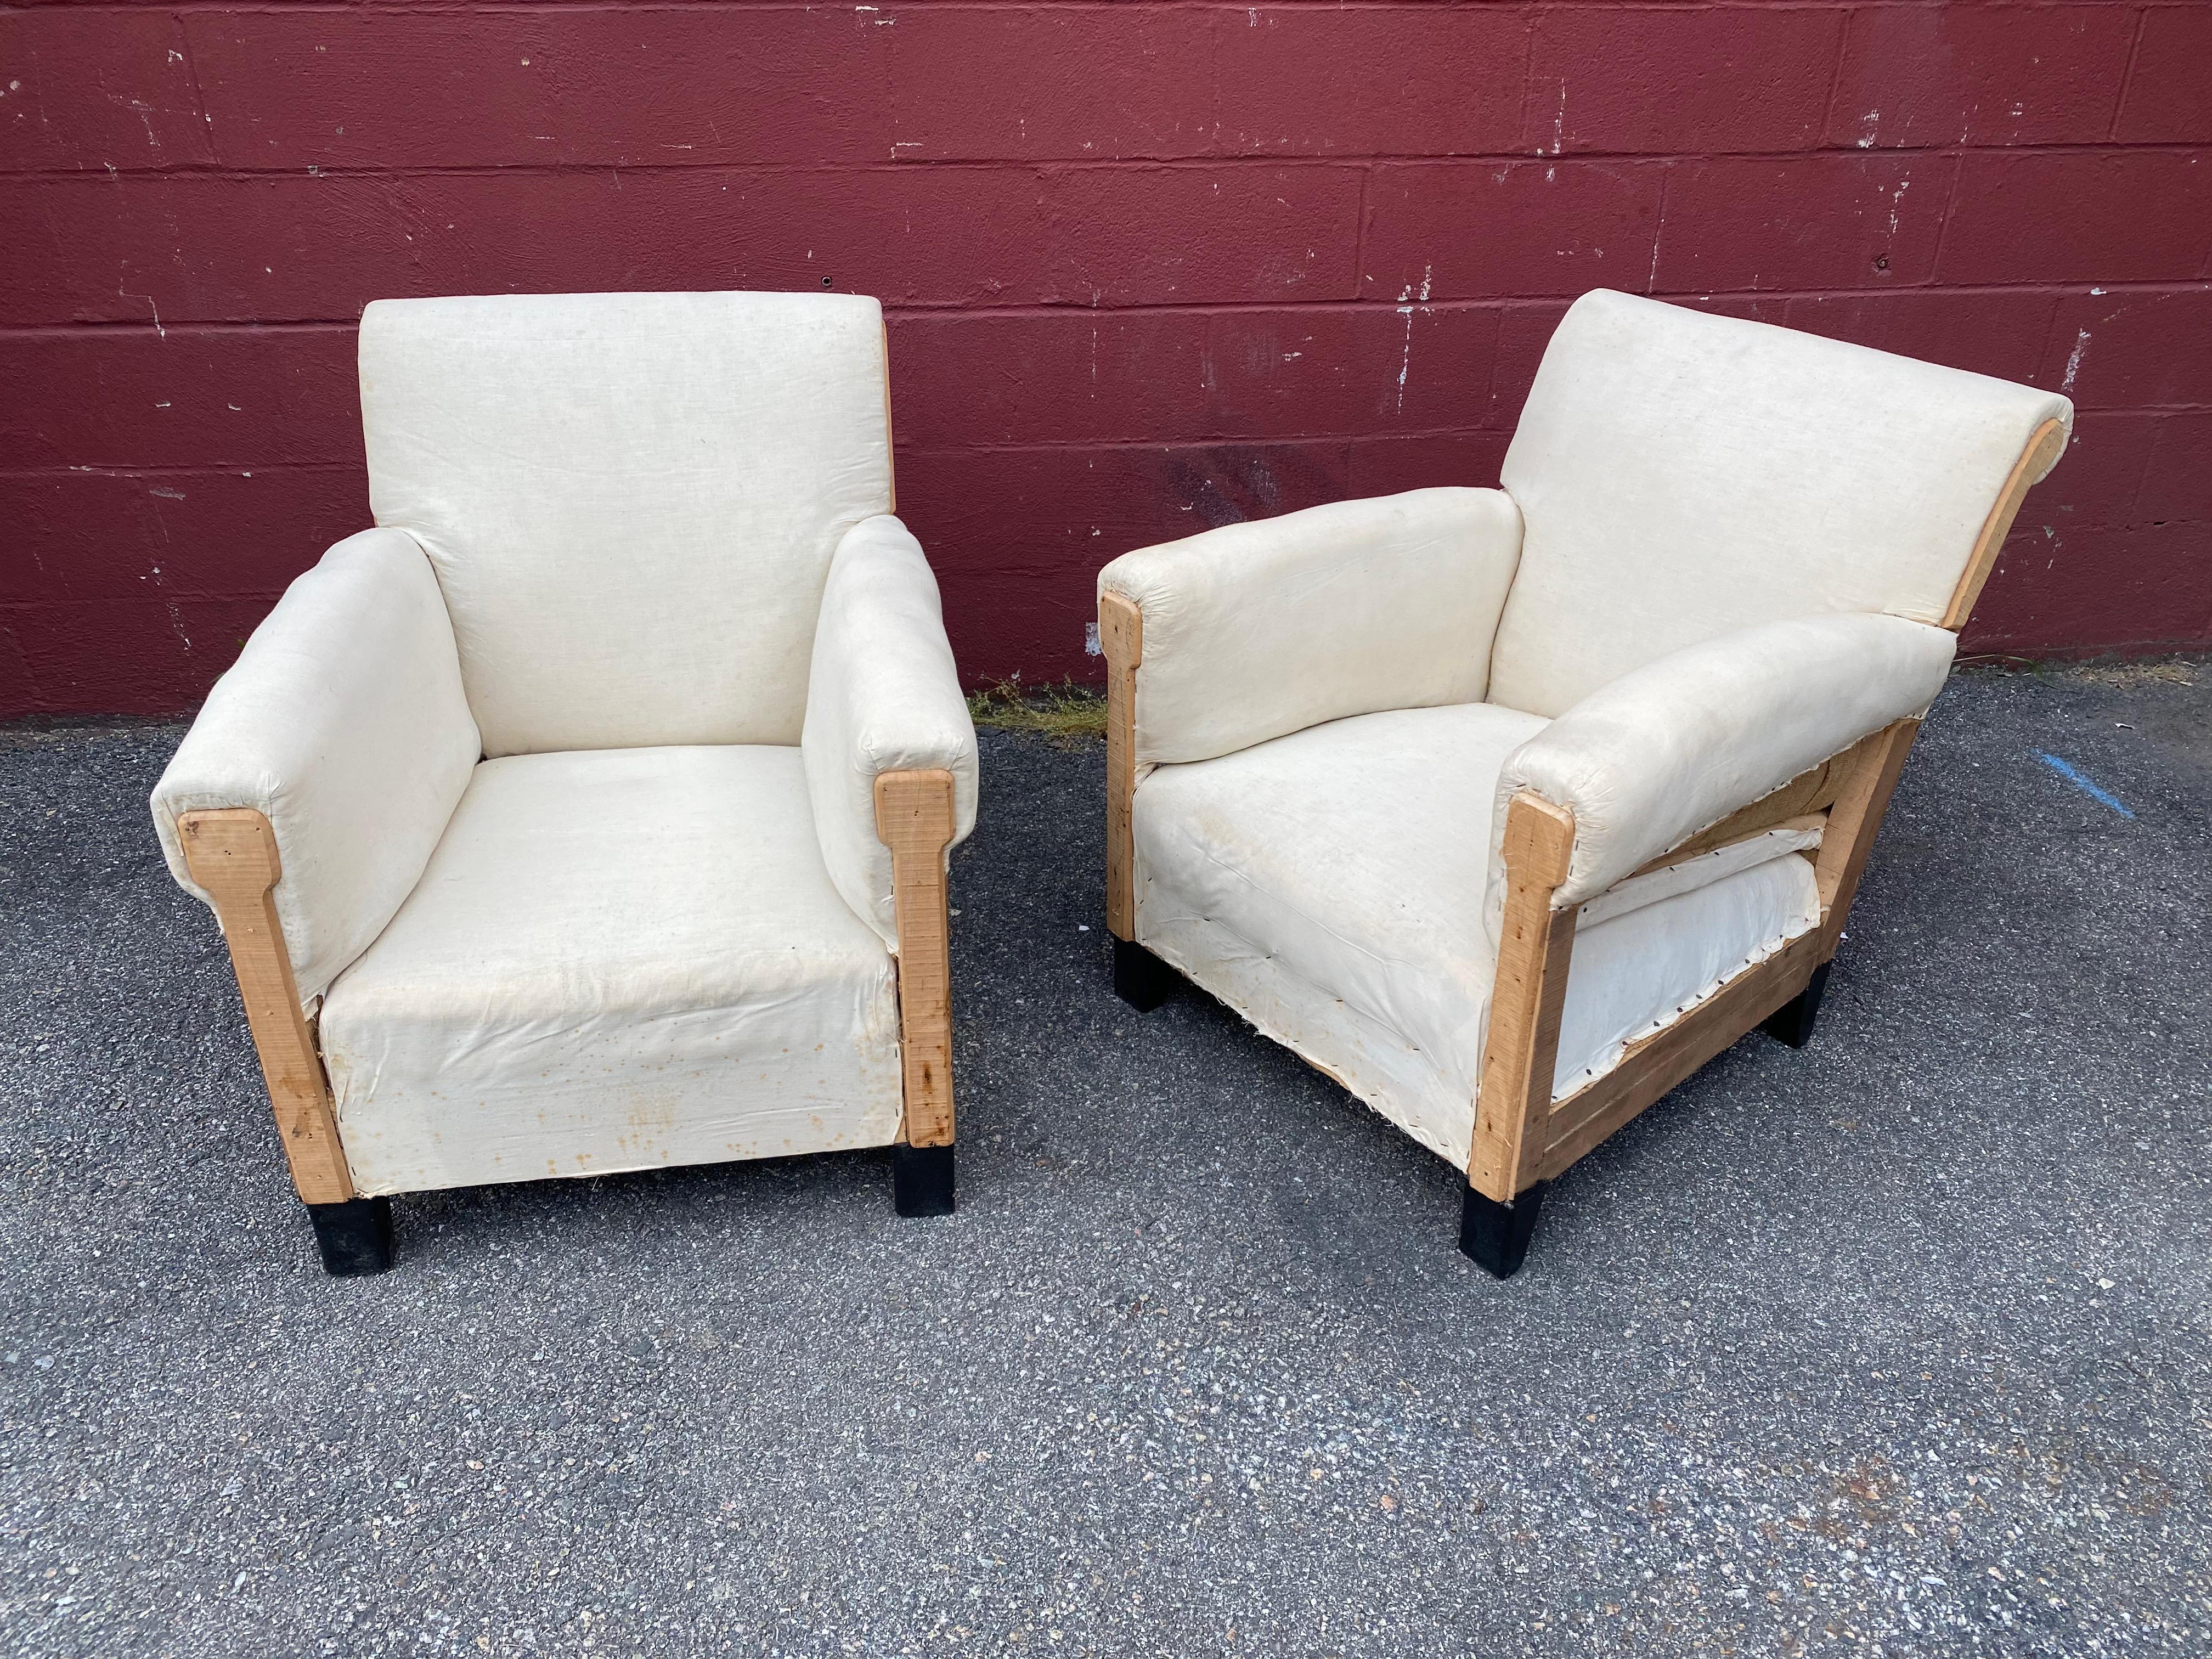 A handsome pair of French club chairs that have been stripped down to the muslin and are ready to be upholstered.  The small scale armchairs are very comfortable for their size and with the right upholstery job they will be stunning. (We always